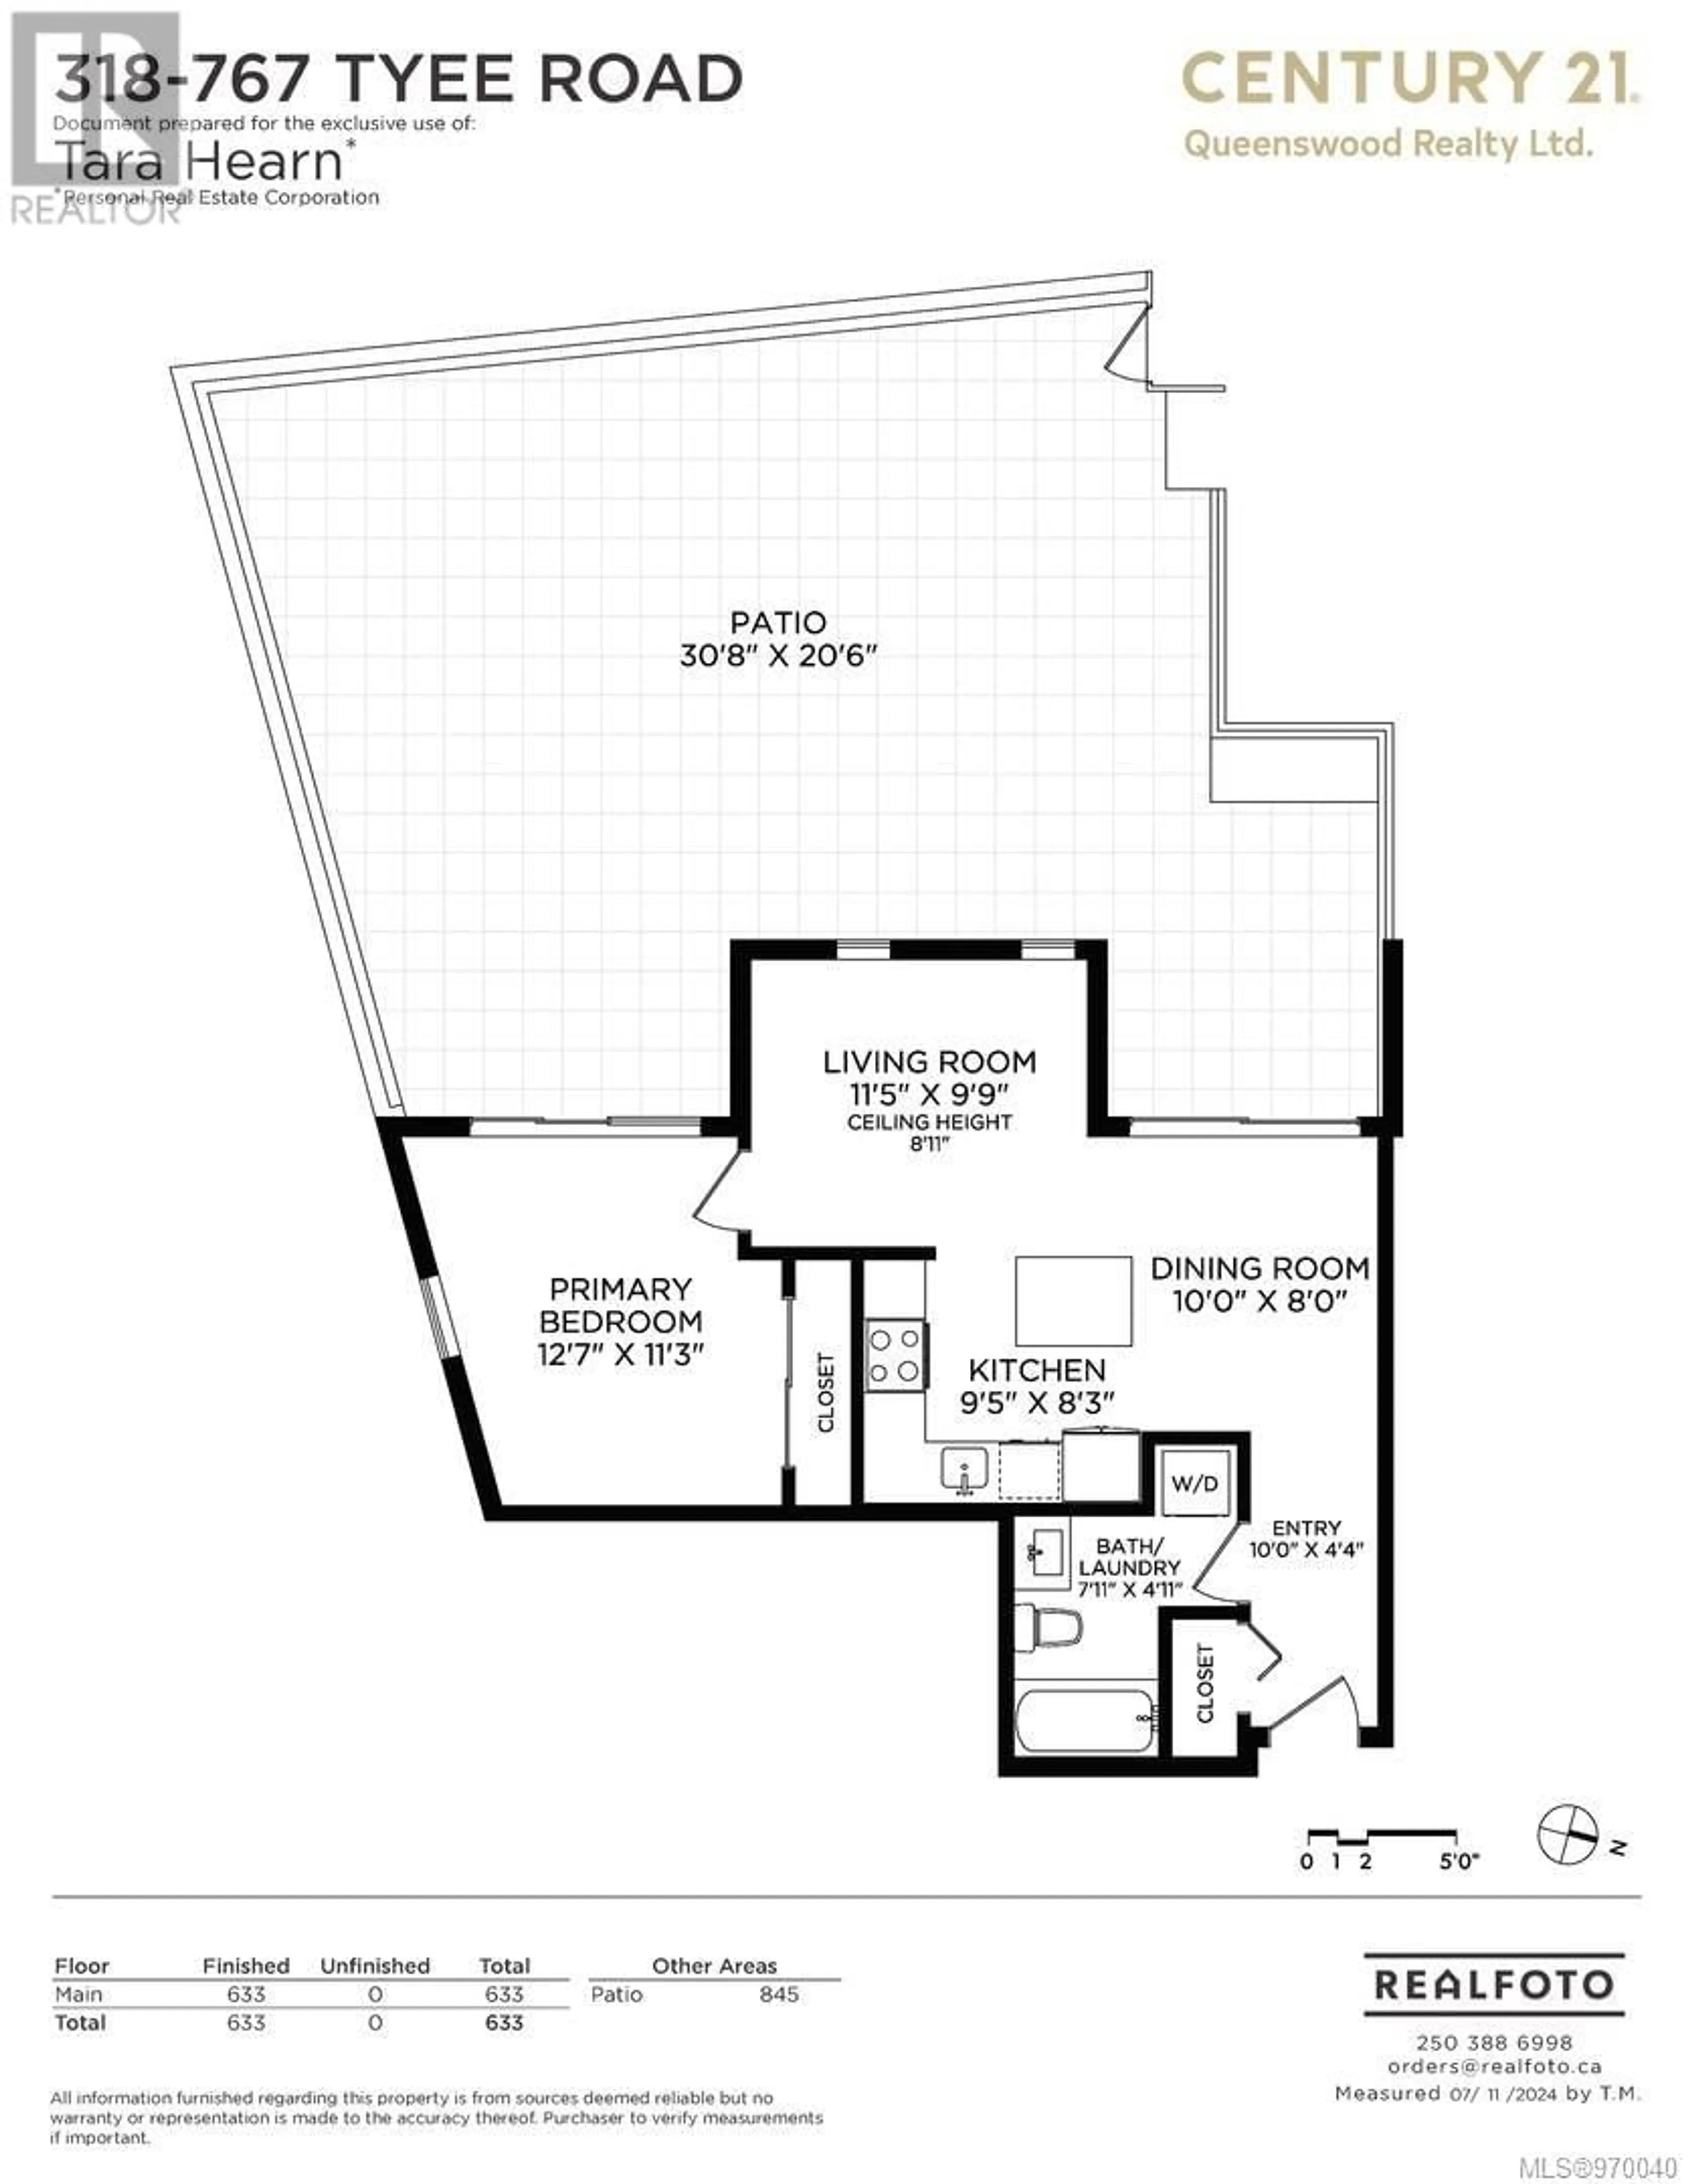 Floor plan for 318 767 Tyee Rd, Victoria British Columbia V9A0G5